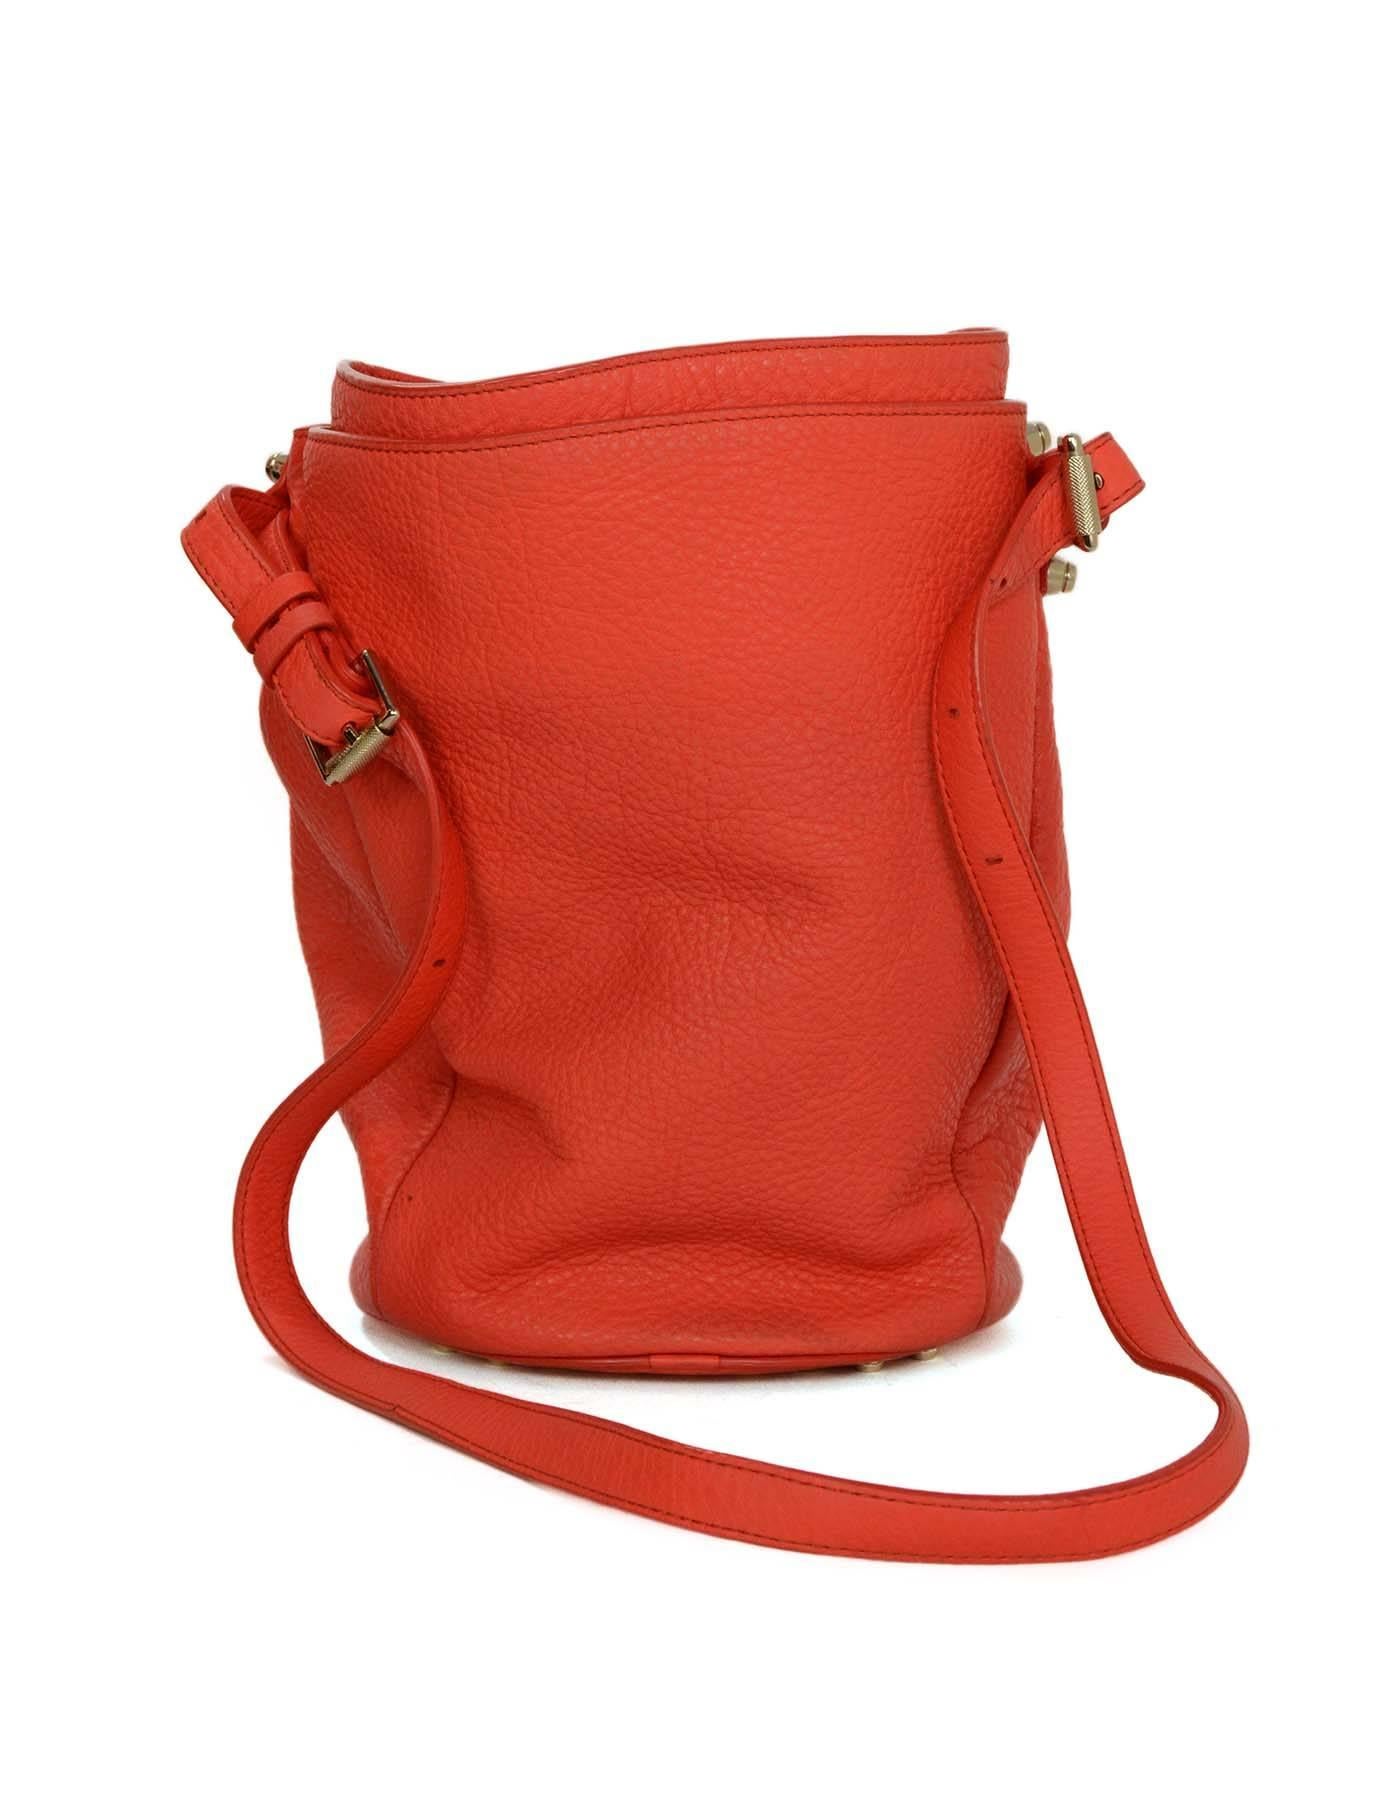 Alexander Wang Red Pebbled Leather Diego Bucket Bag SHW In Excellent Condition In New York, NY